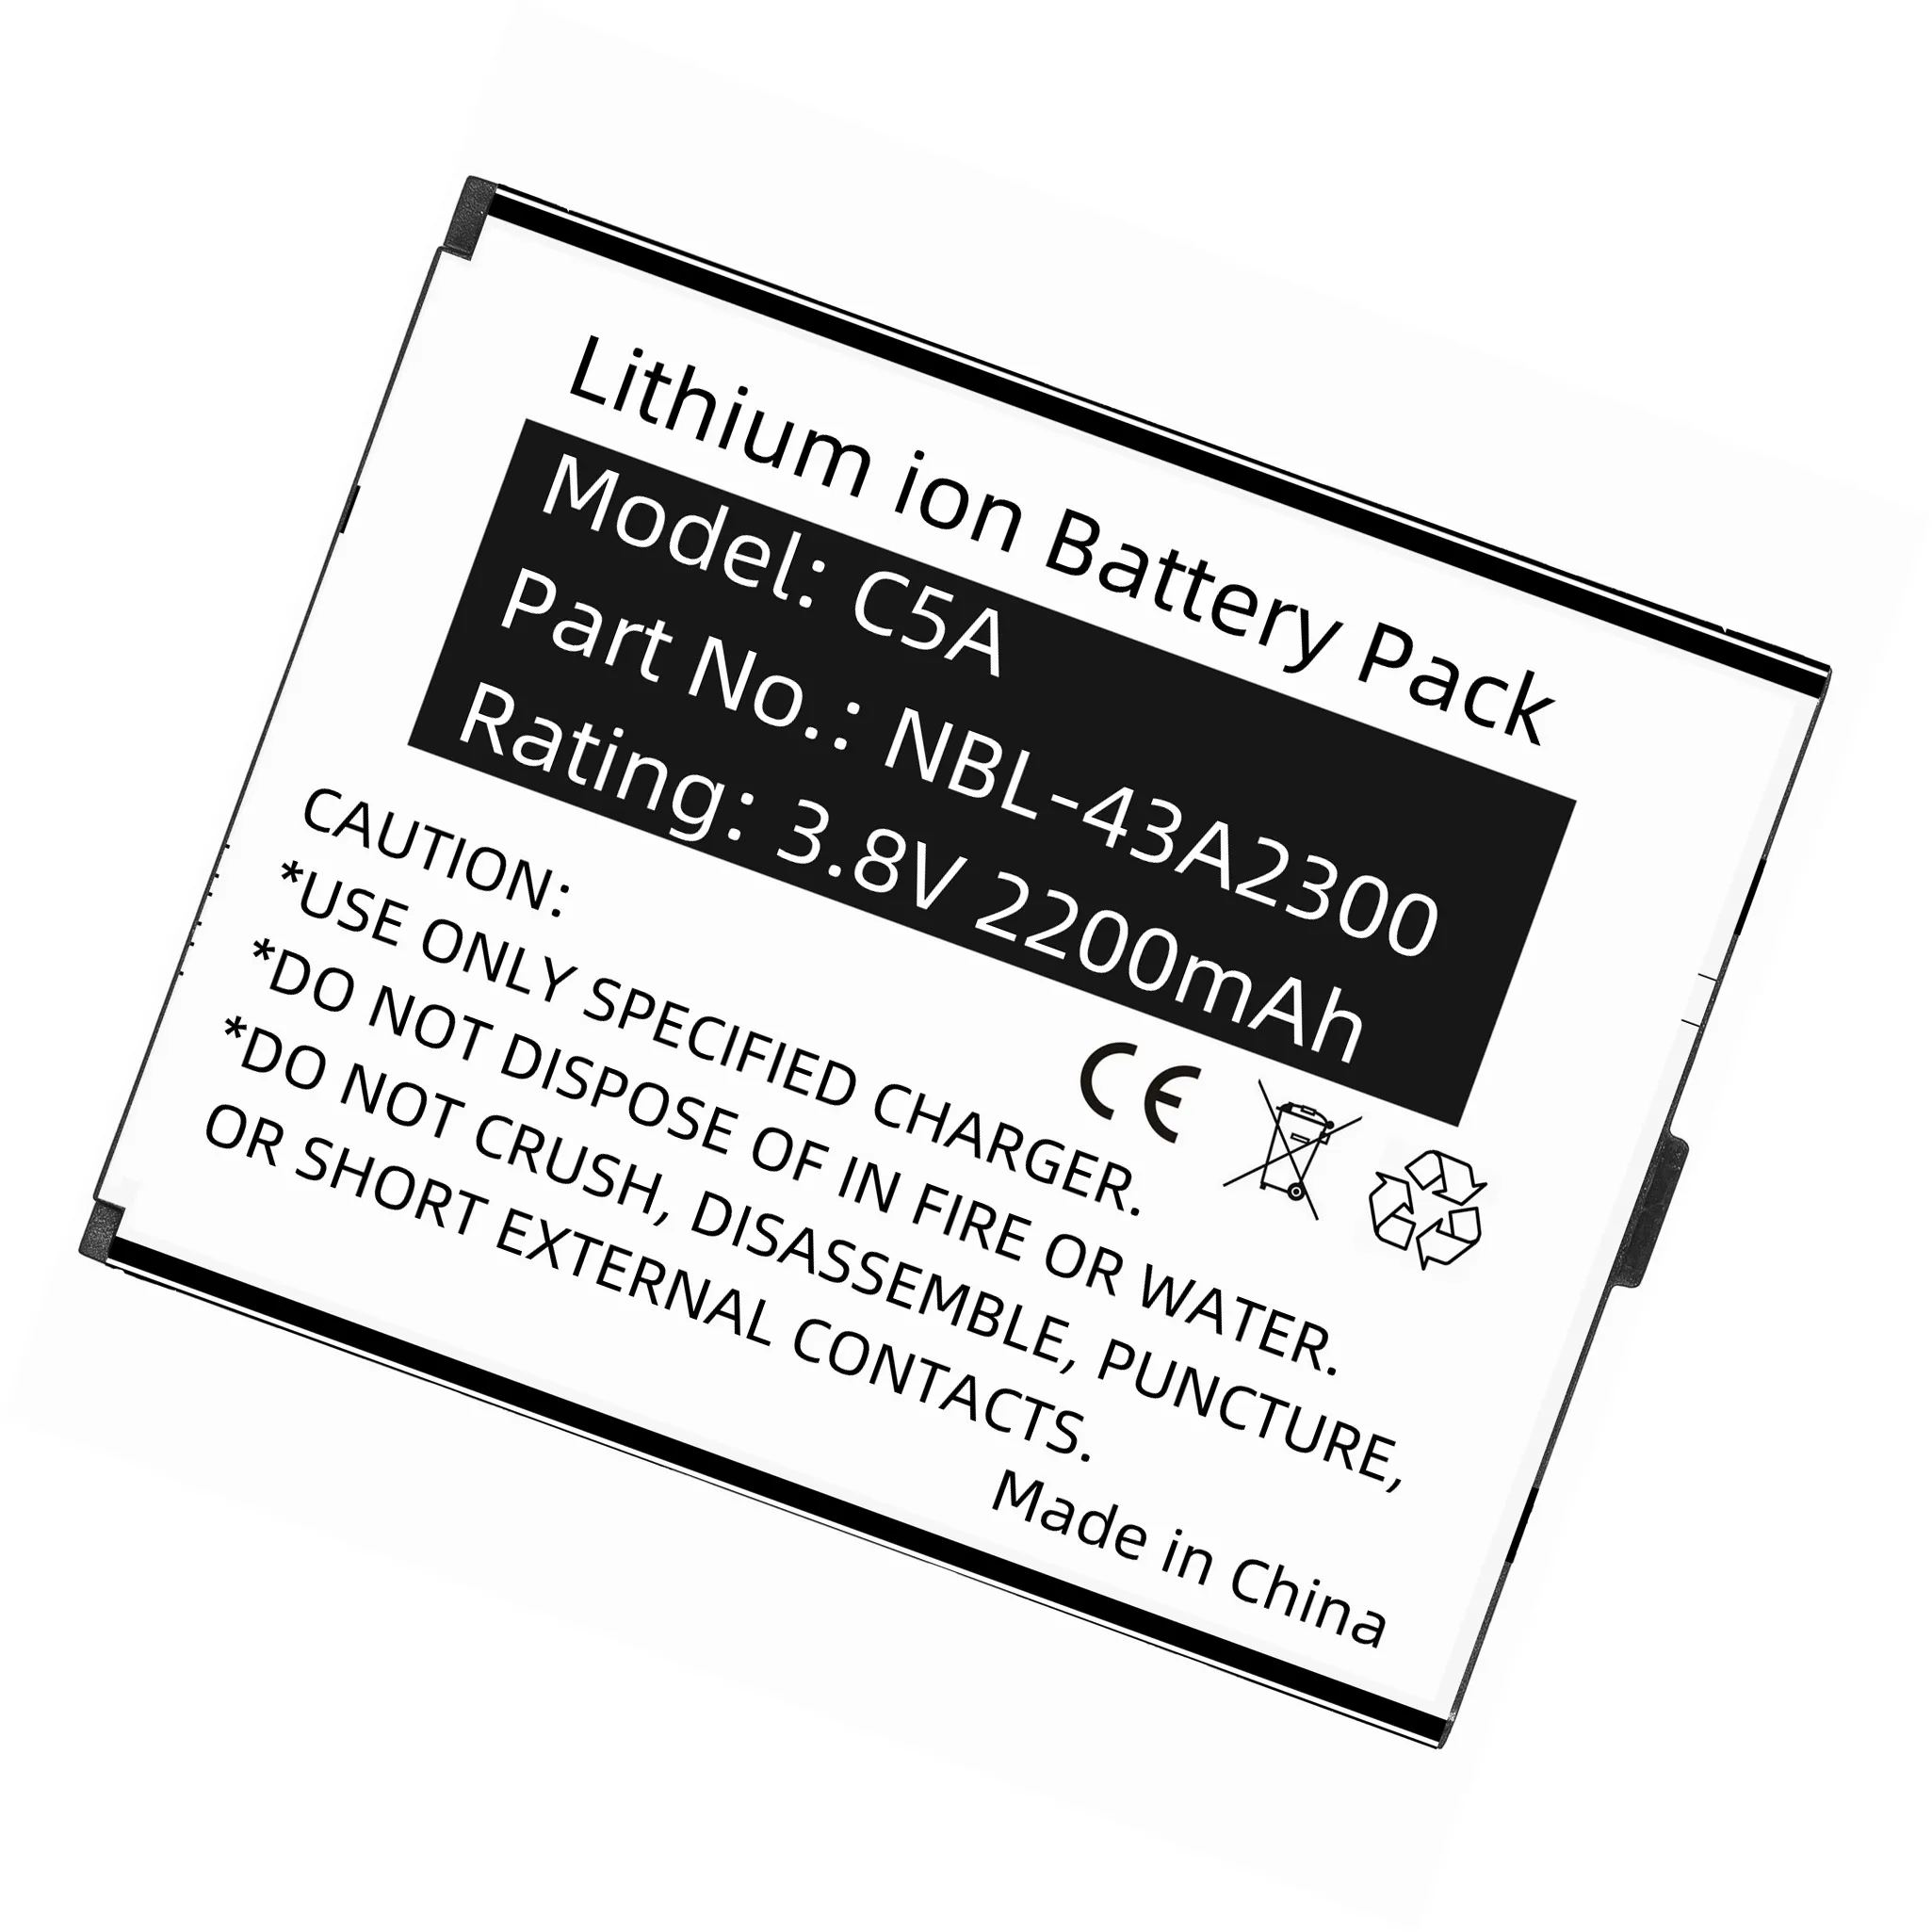 2200mAh 3.8V Li ion lithium rechargeable replacement smartphone battery NBL-43A2300 for Neffos C5A C5A Dual SIM TP703A